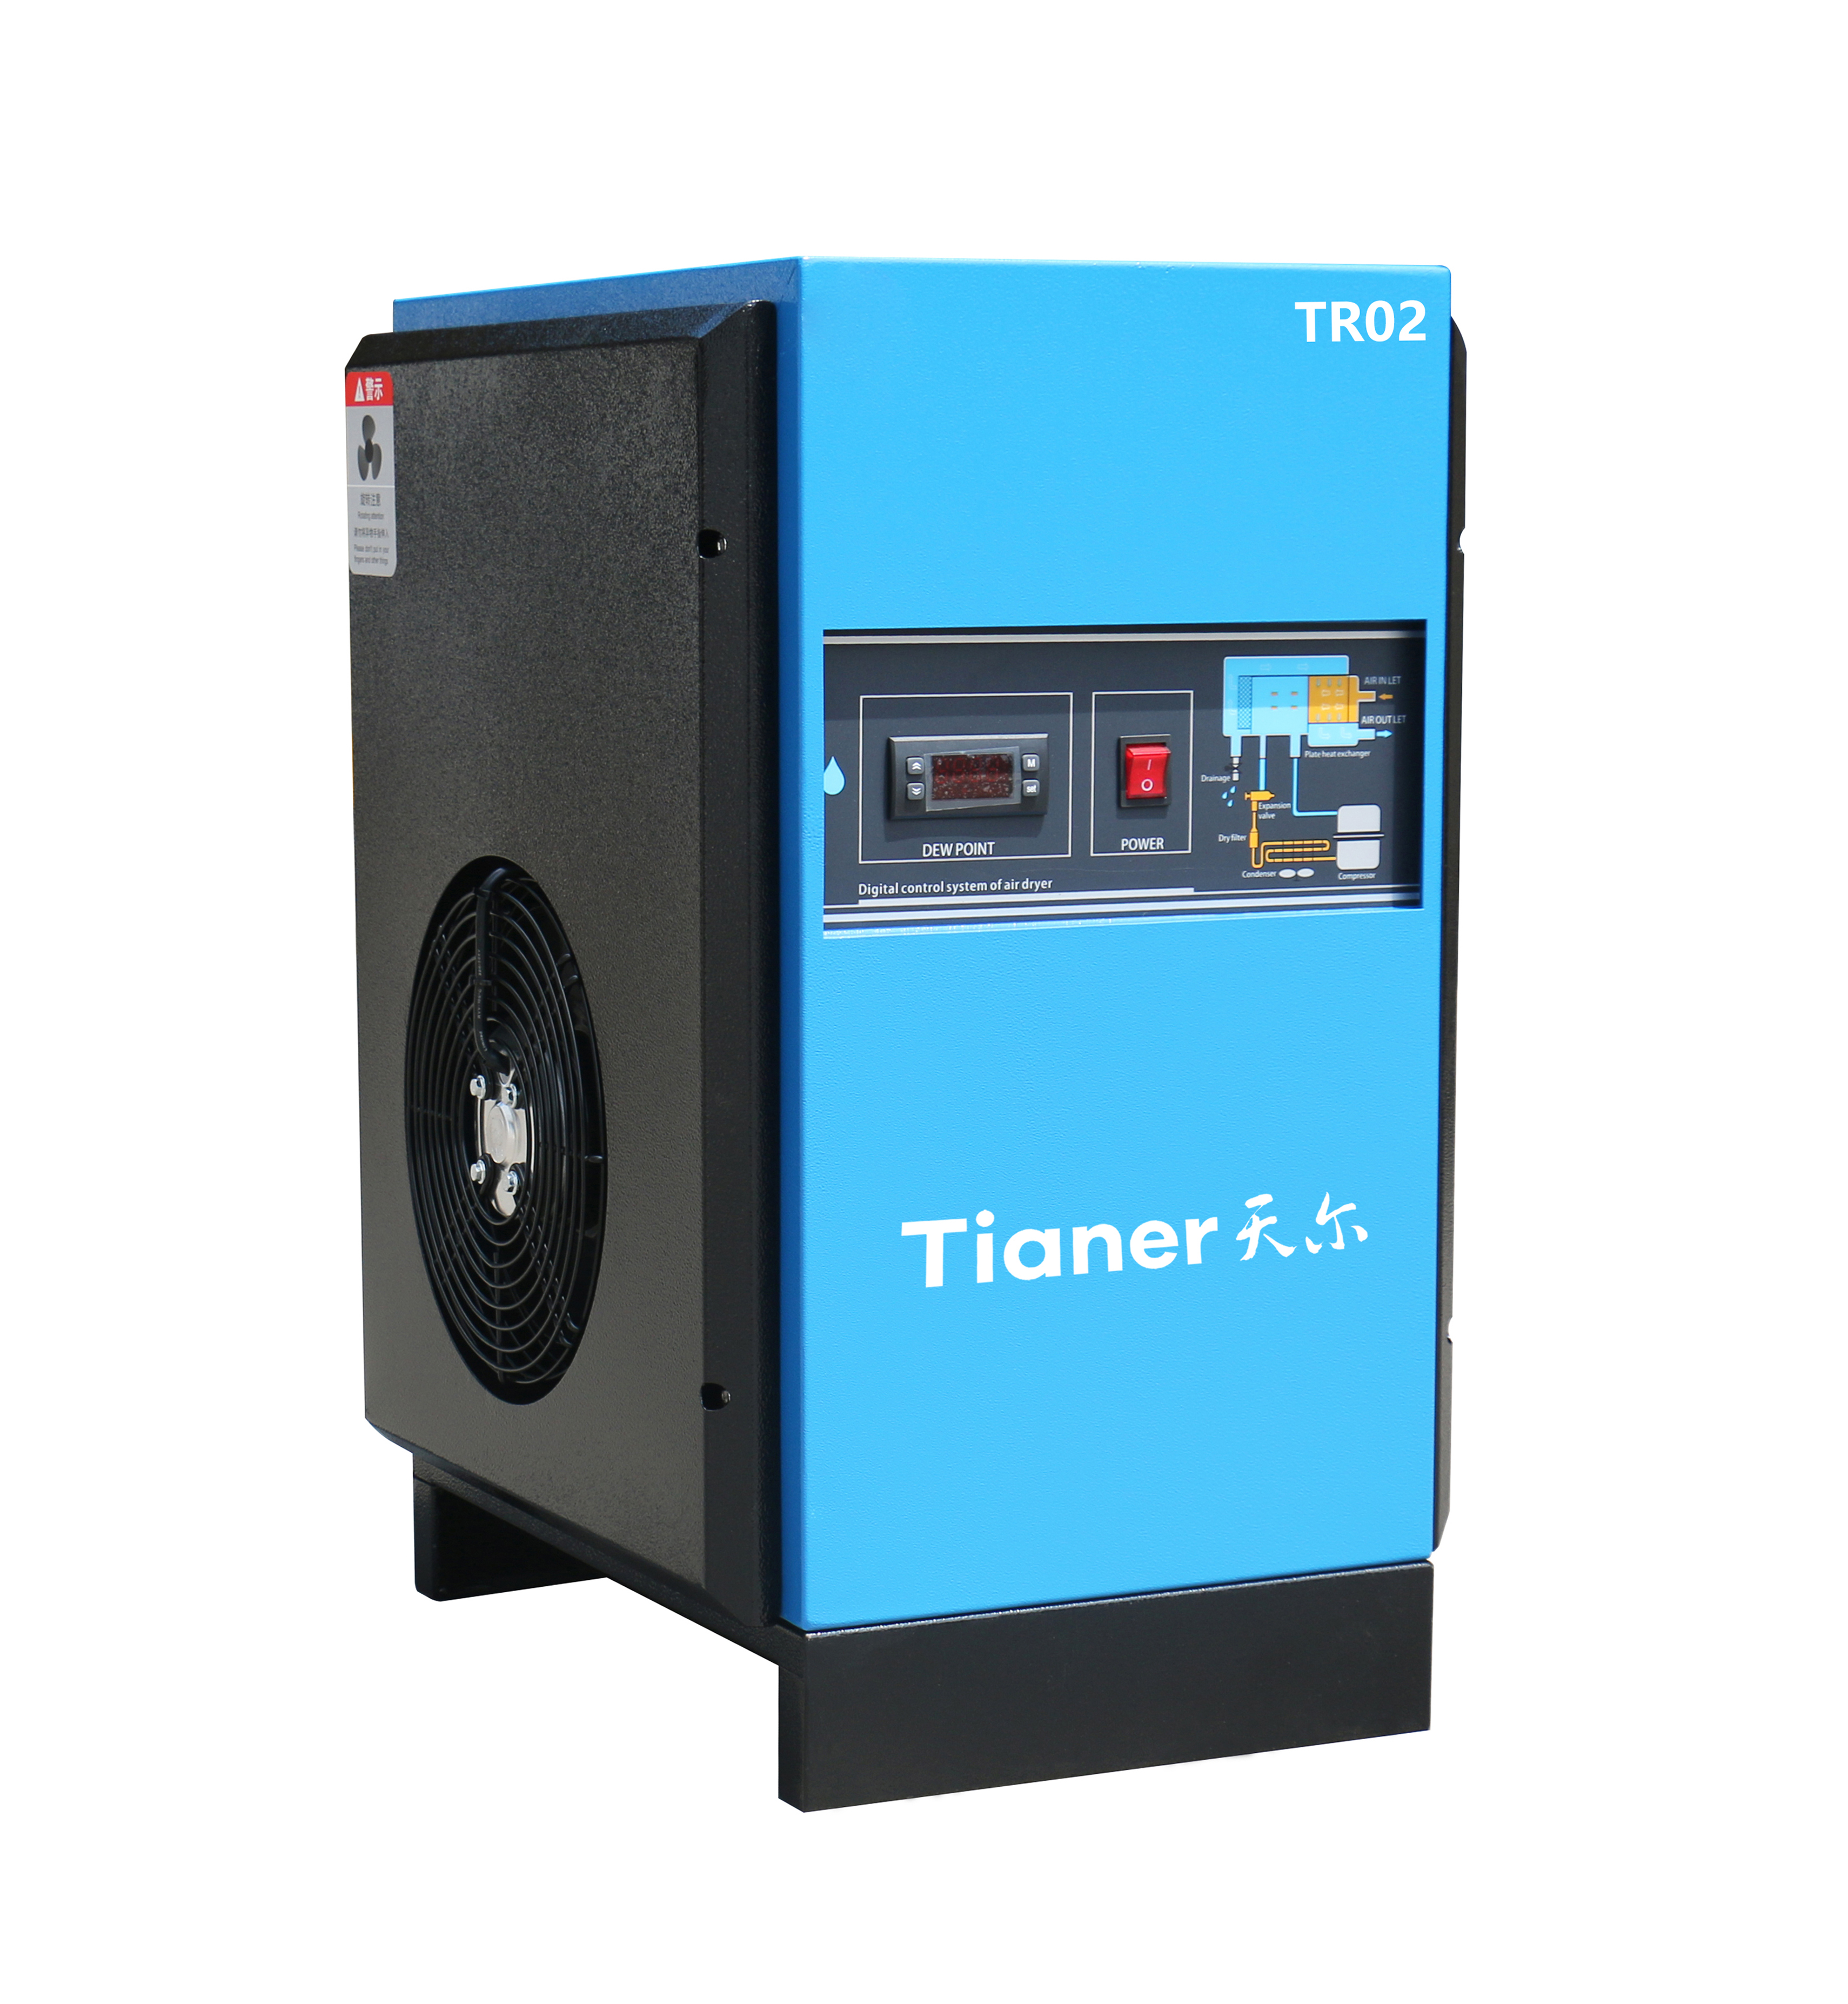 https://www.yctrairider.com/compressed-dryer-machine-tr-01-for-air-compressor-1-2-m3min-product/